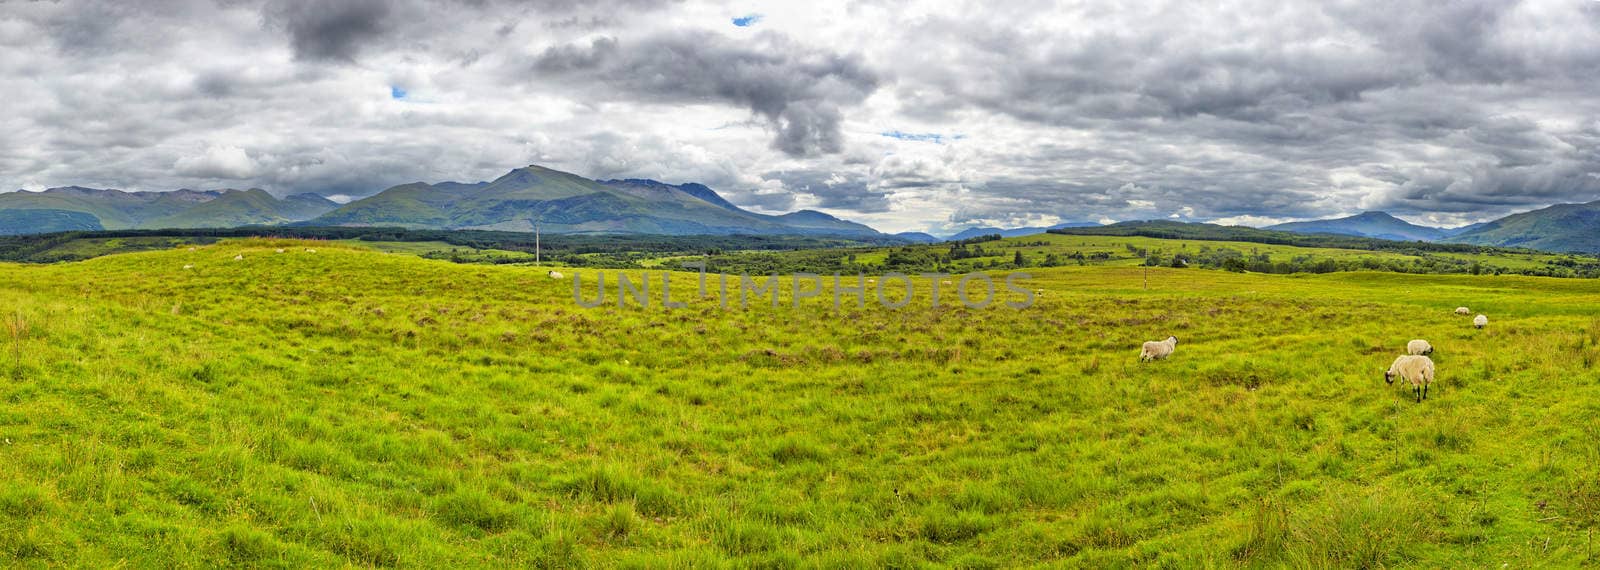 panoramic view of the The Grey Corries Range and Ben Nevis, the highest moutain in Scotland and the UK